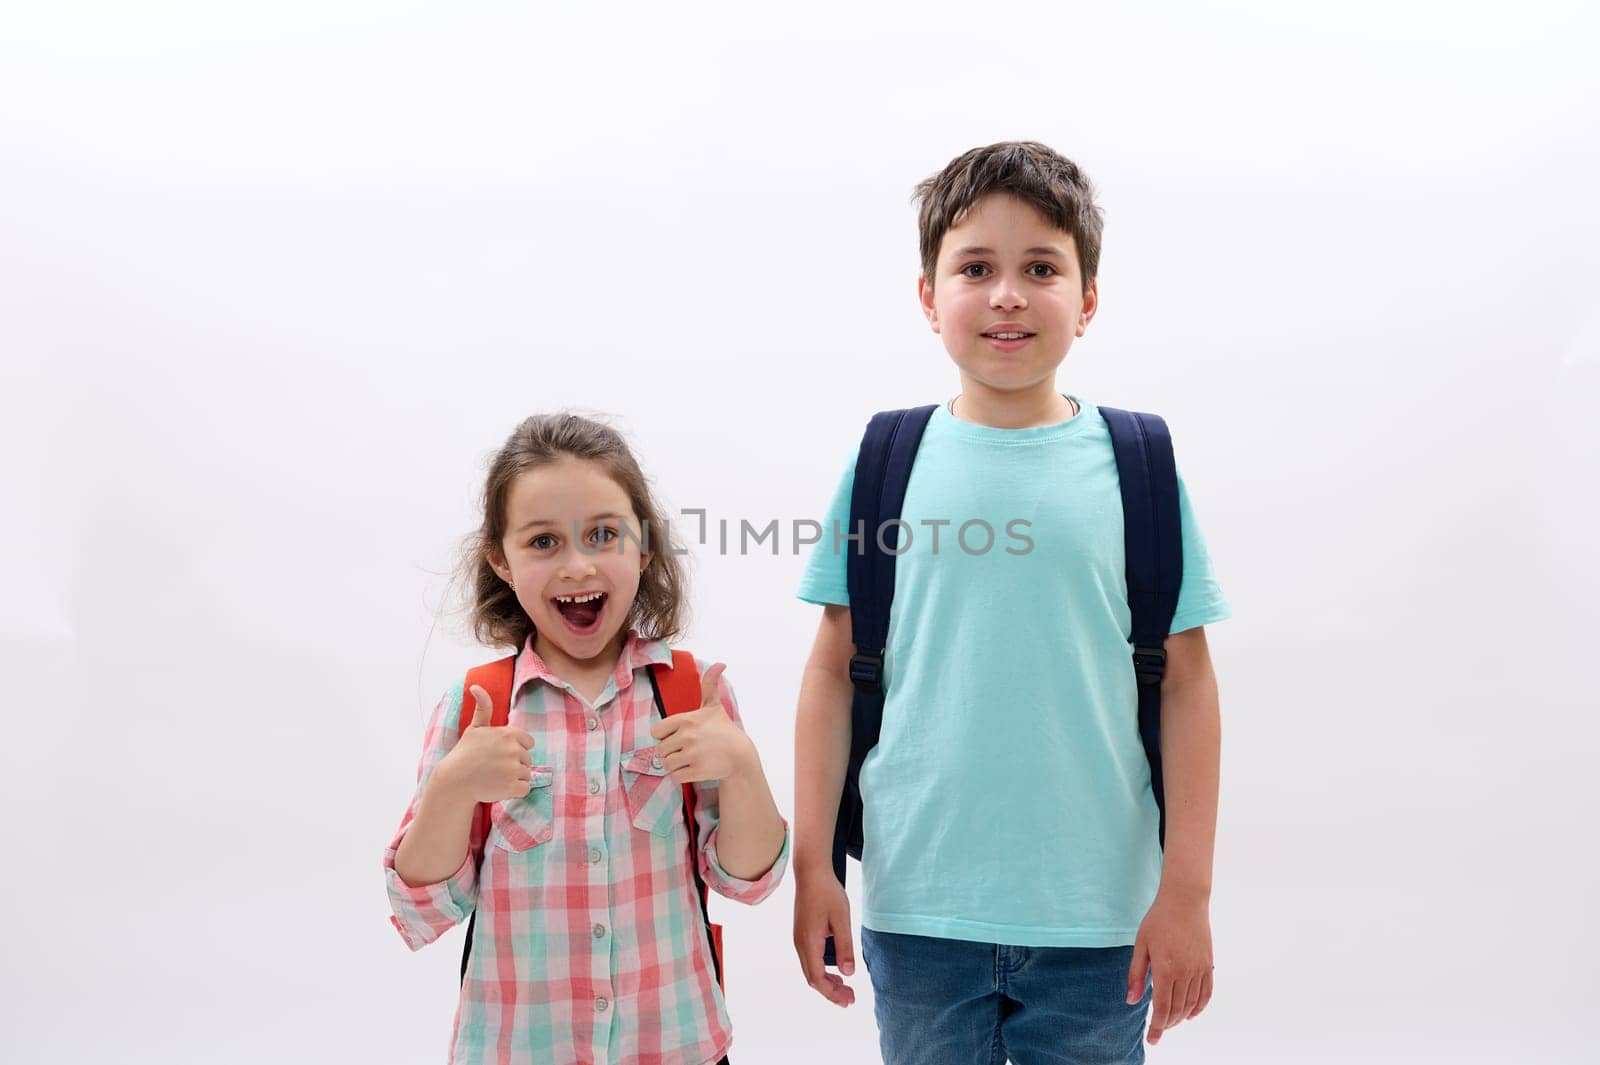 Cheerful school kids, kid girl and teen boy expressing positive emotions, carrying backpacks, smiling looking at camera by artgf